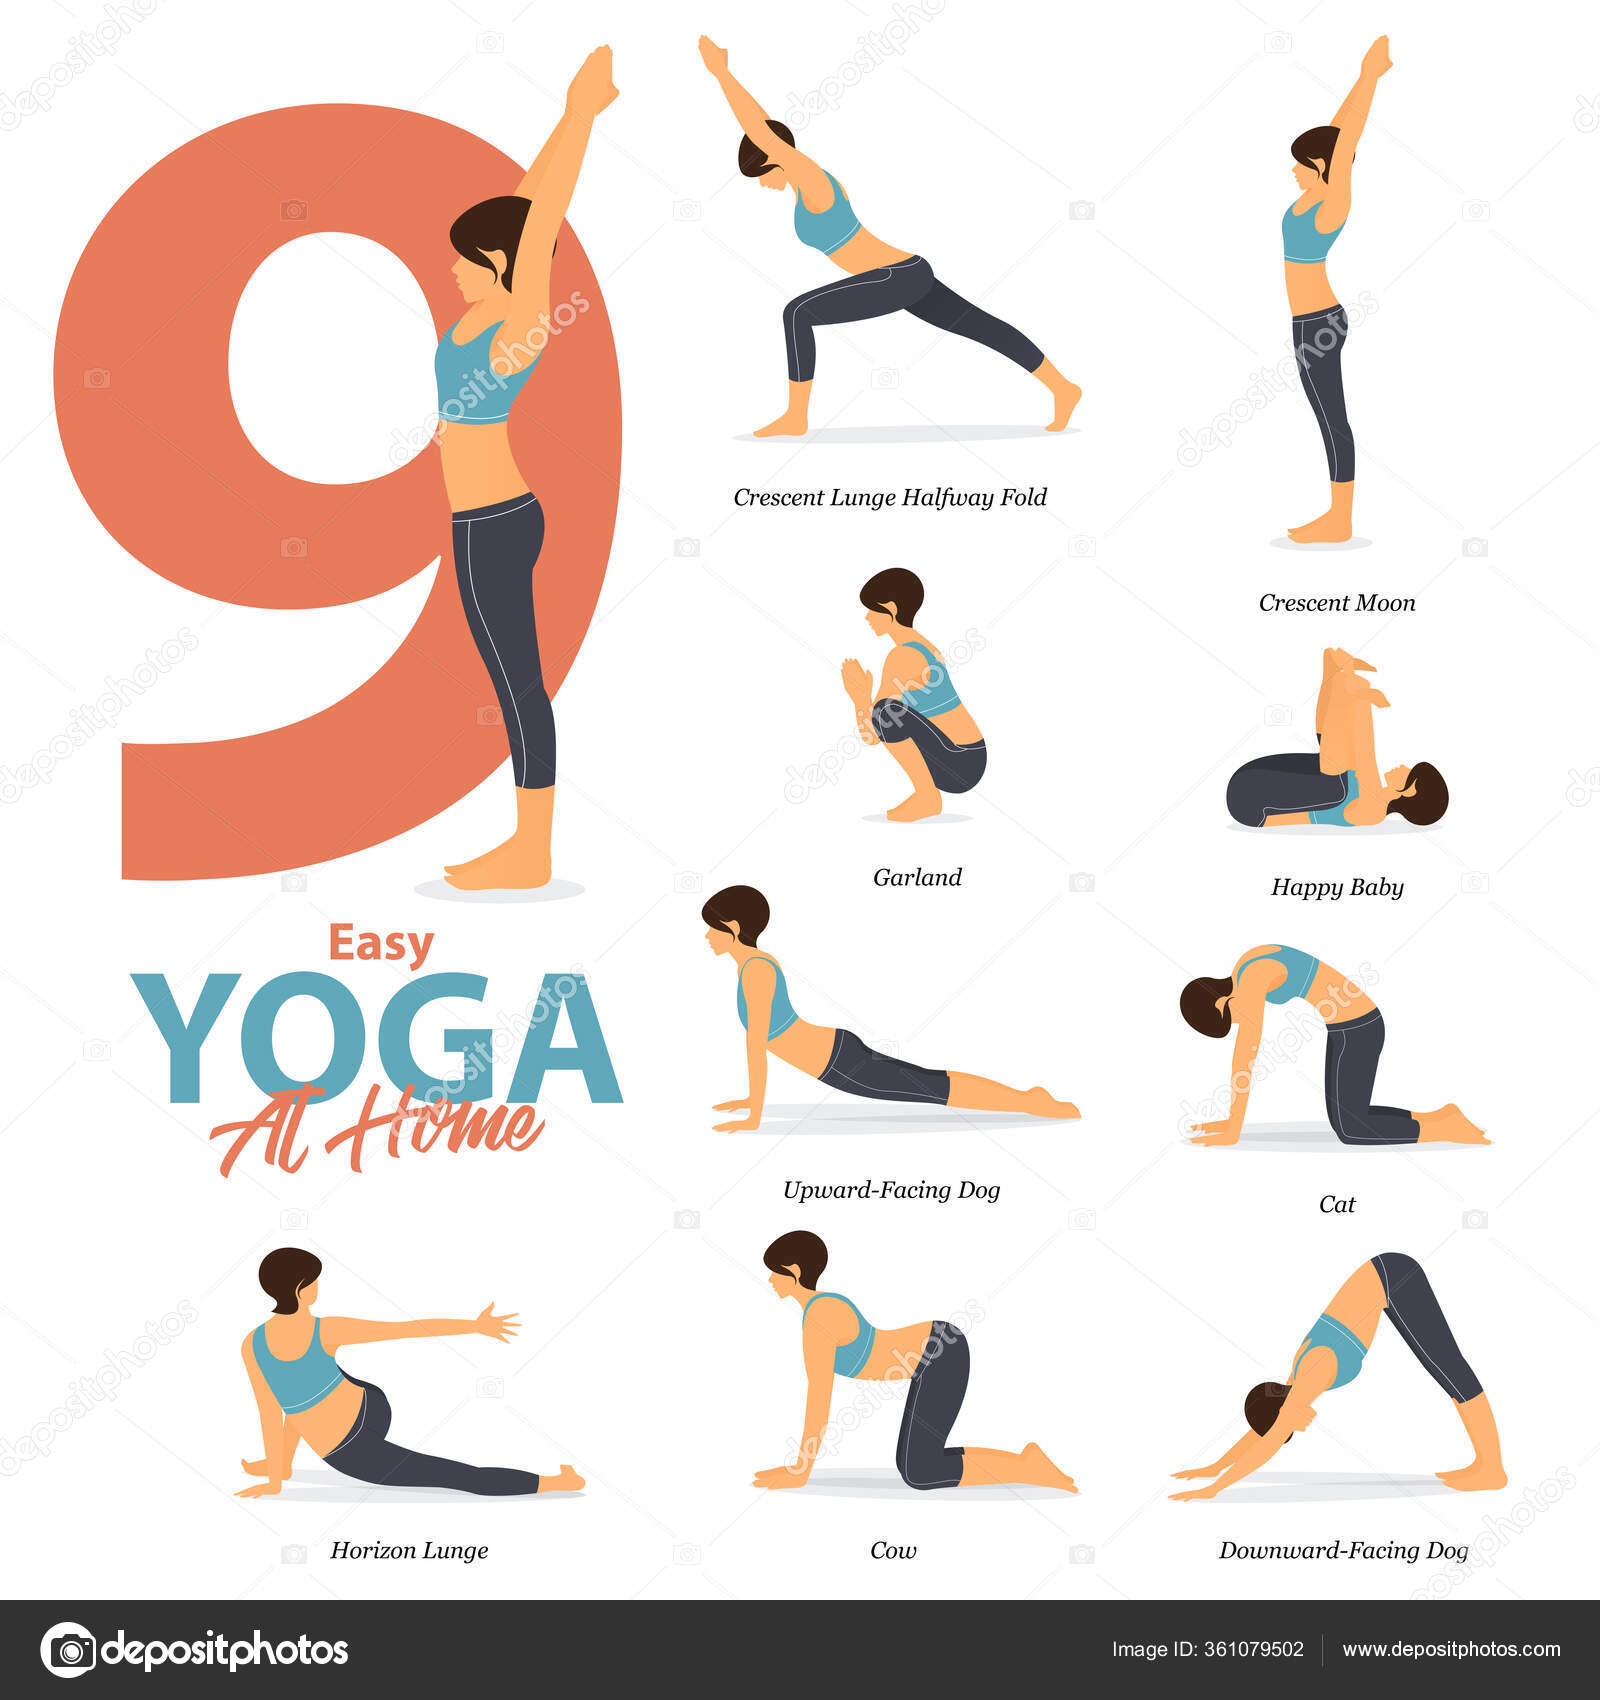 Yoga Poses Line Art Cliparts, Stock Vector and Royalty Free Yoga Poses Line  Art Illustrations